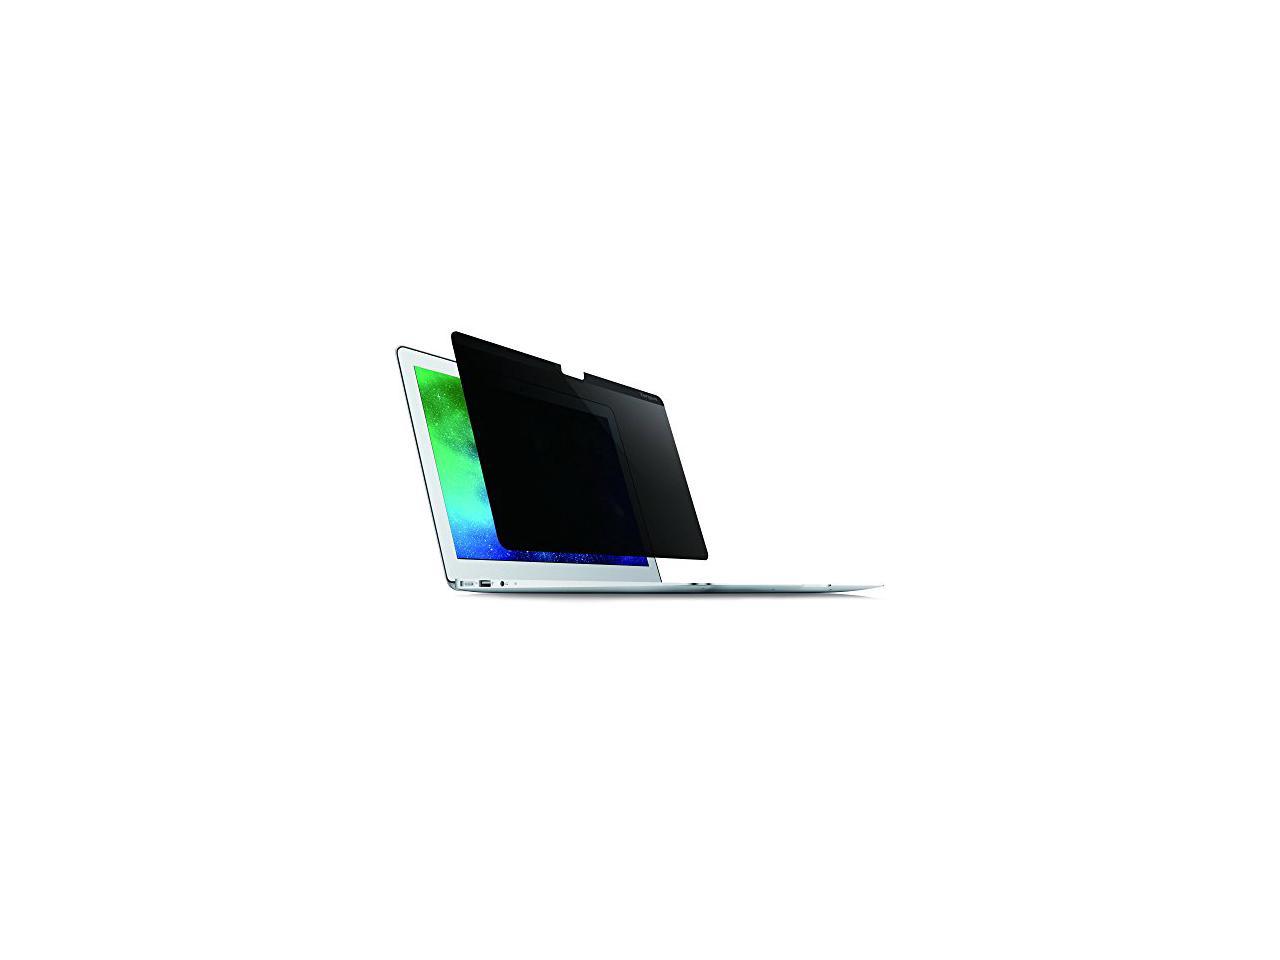 Targus Magnetic Privacy Screen for MacBook Pro 15-inch (2017) and MacBook Pro 15-inch (2016) - ASM154MBP6GL